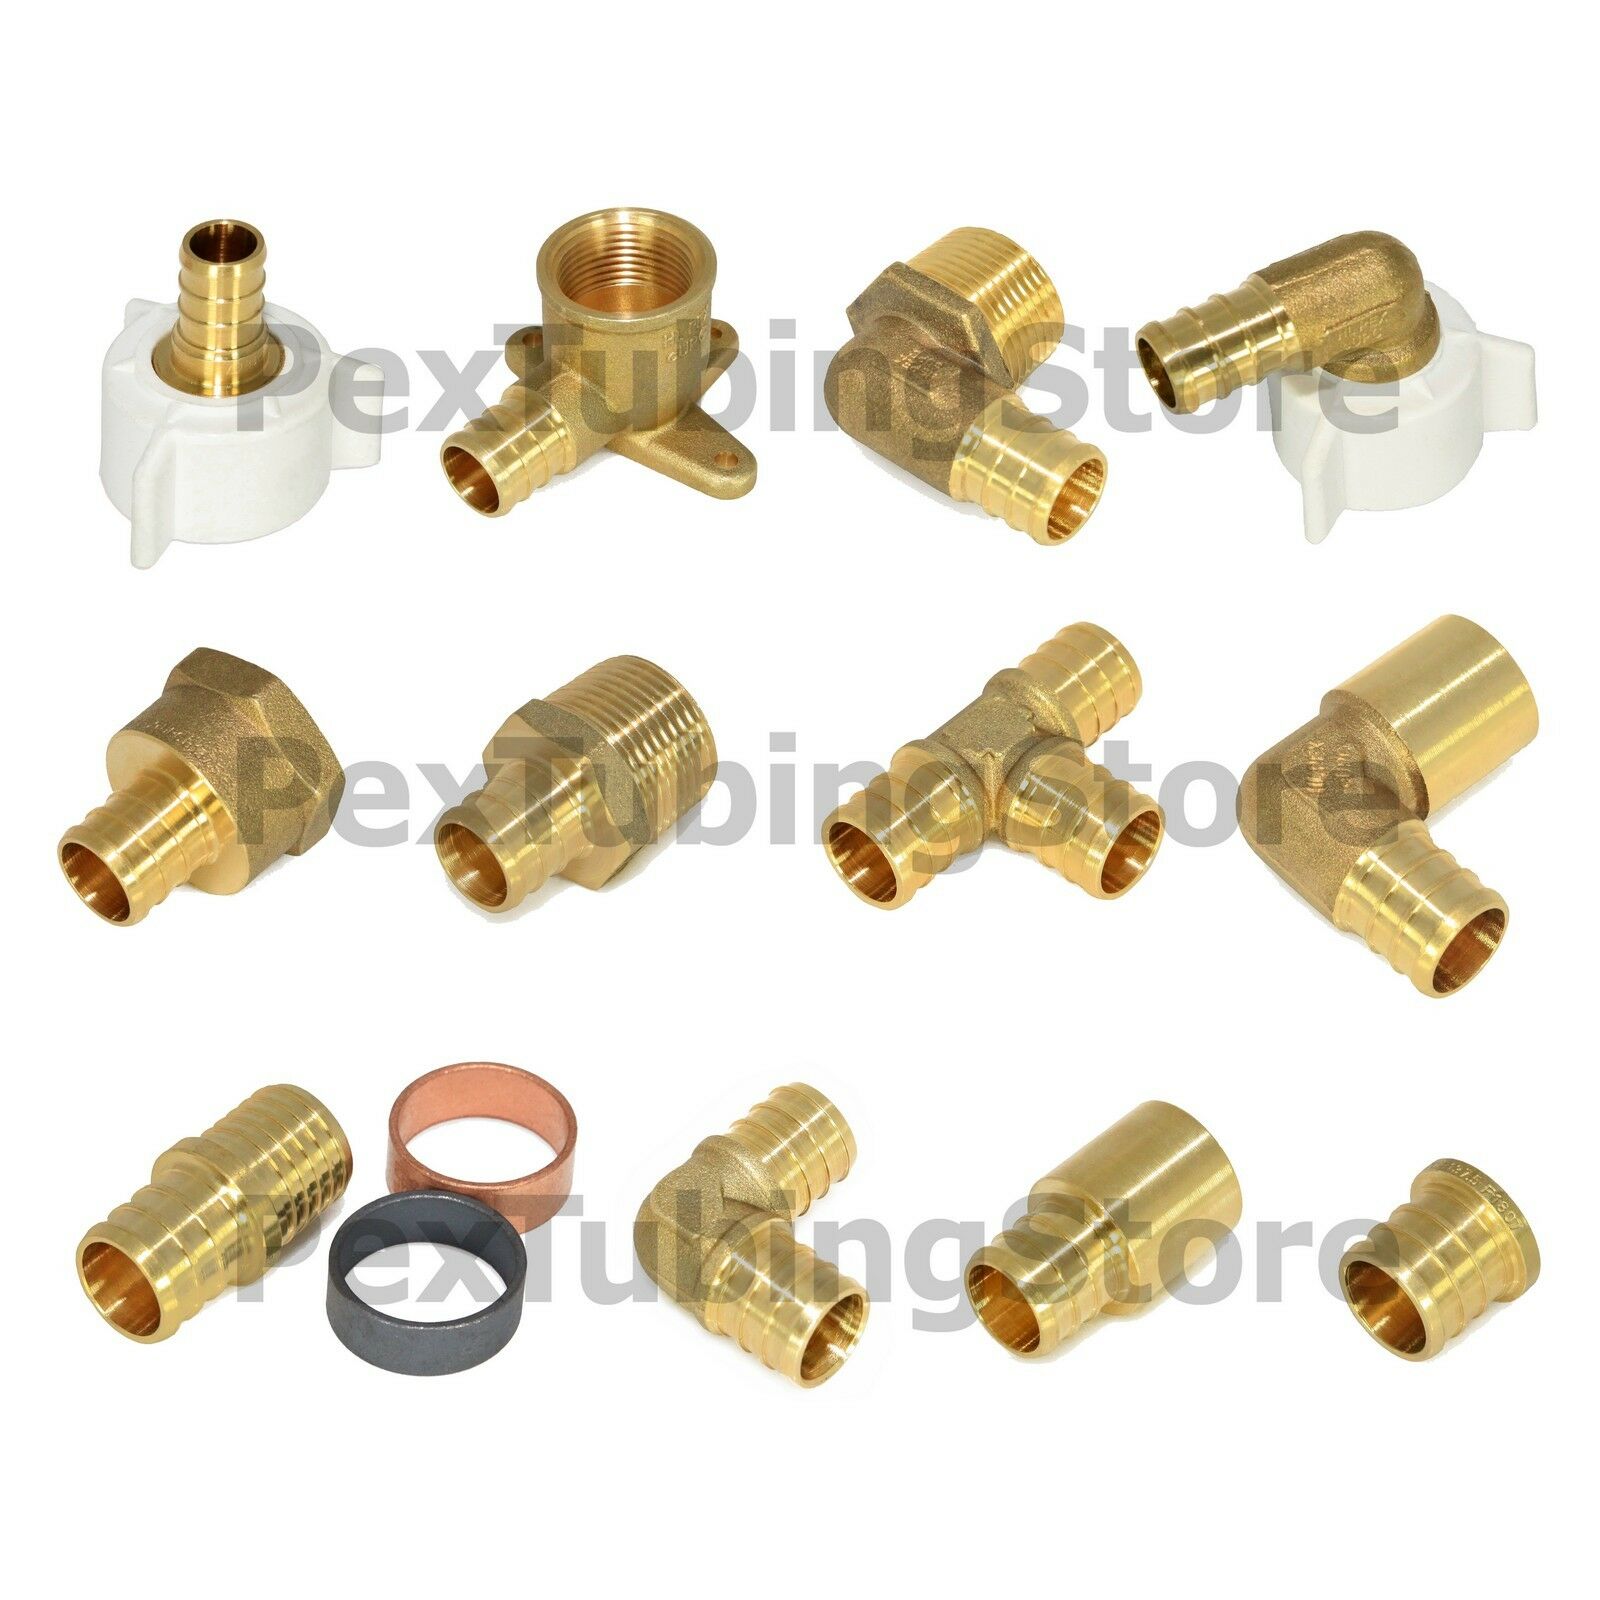 PEX Fittings All Sizes - Brass Crimp Elbows Tees Couplings Adapters, ASTM, NSF